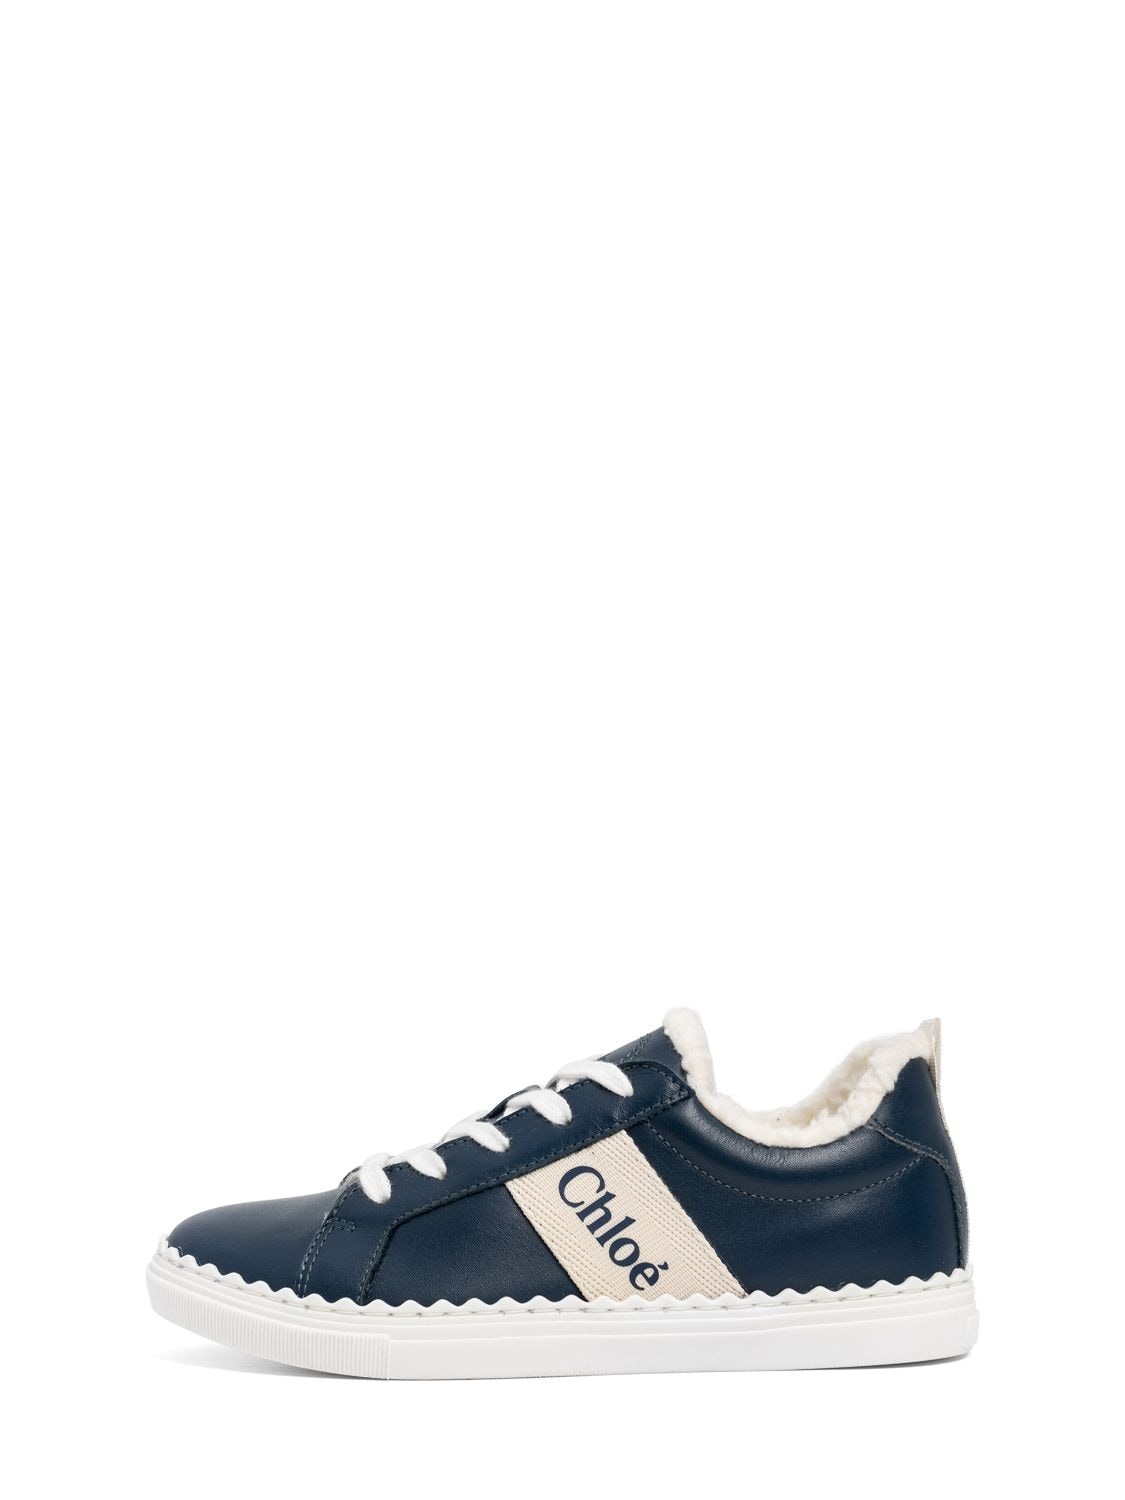 Chloé Kids' Leather Lace-up Sneakers W/ Logo In Blue